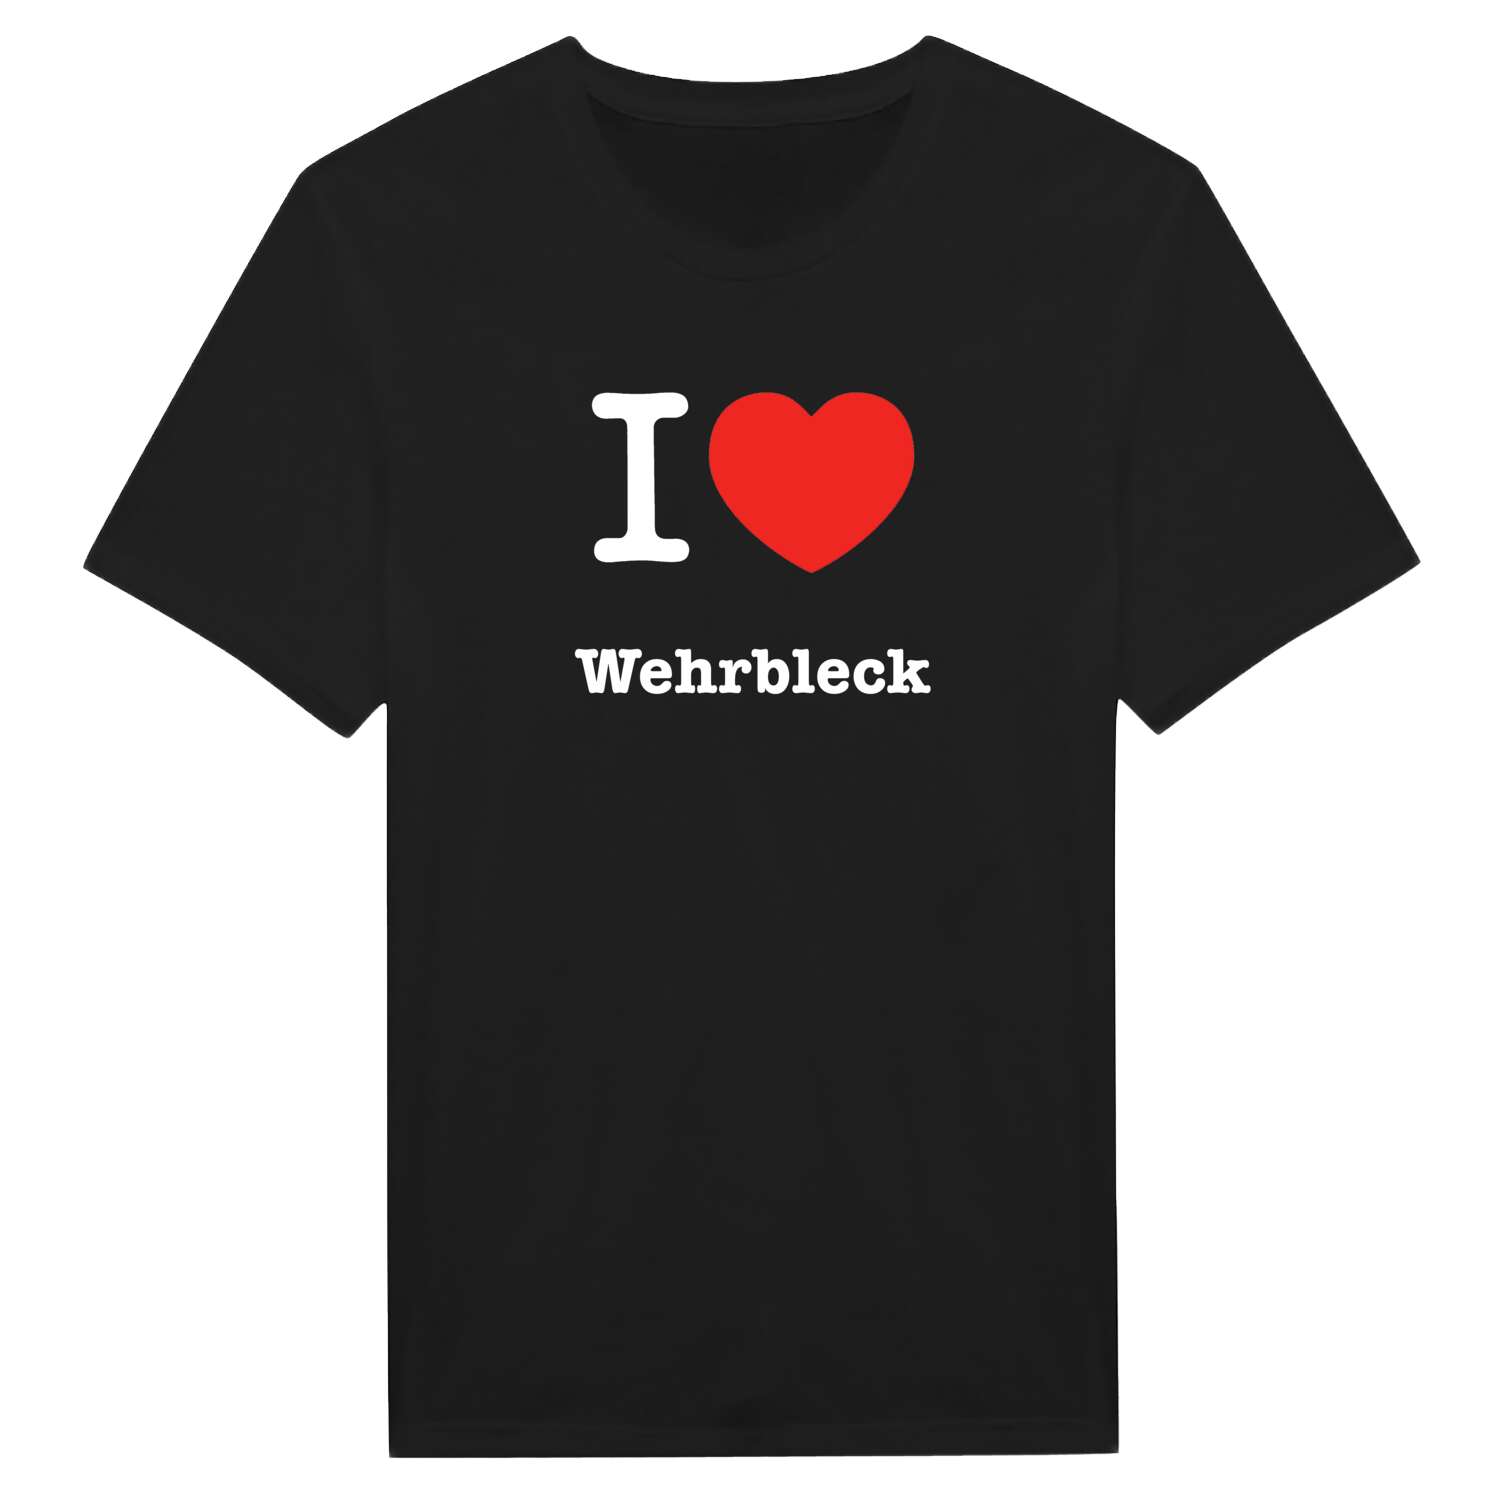 Wehrbleck T-Shirt »I love«